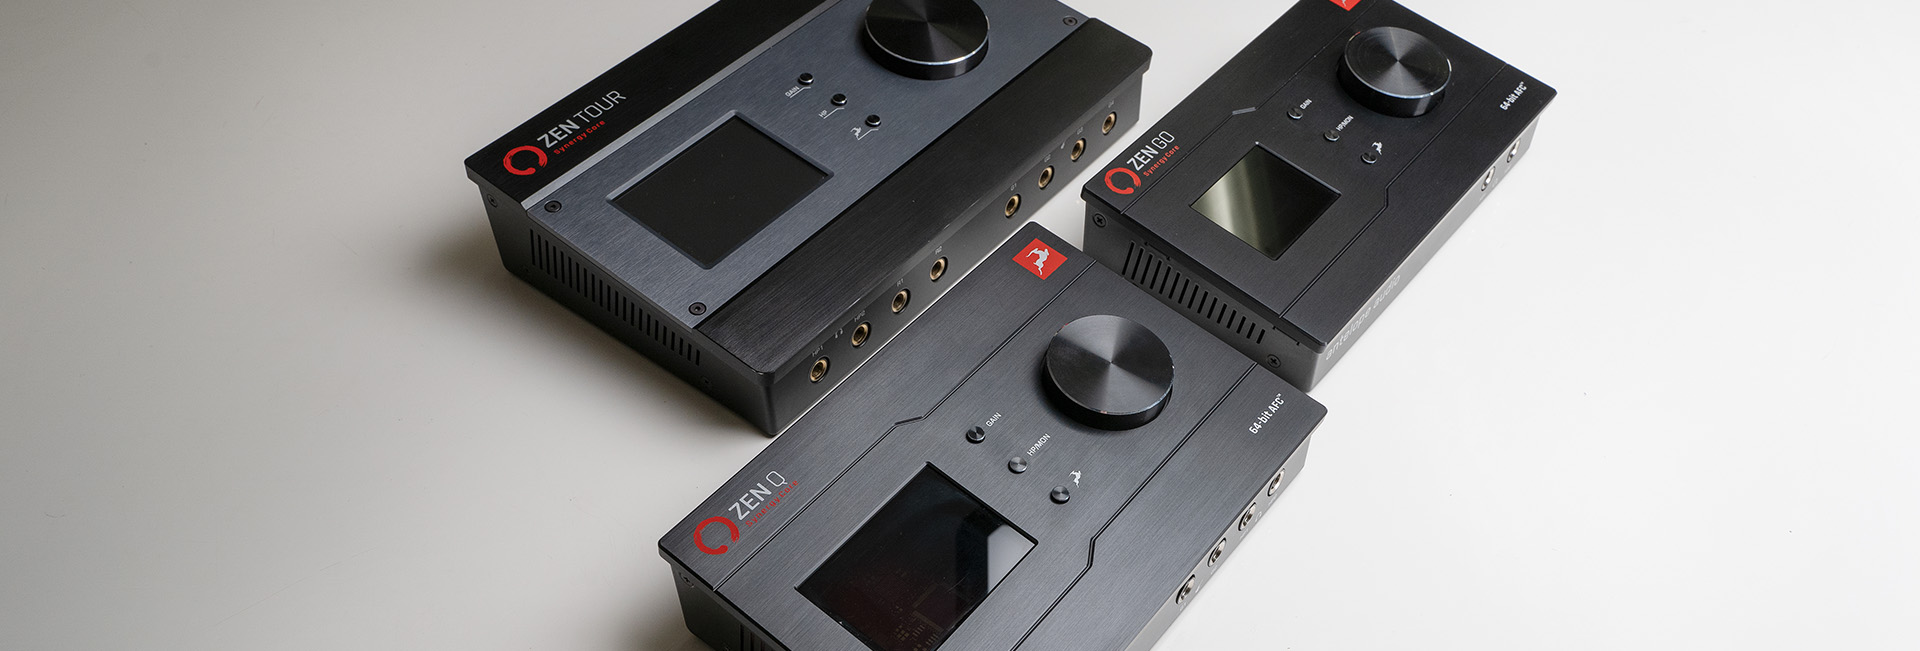 What type of audio interface do you need?